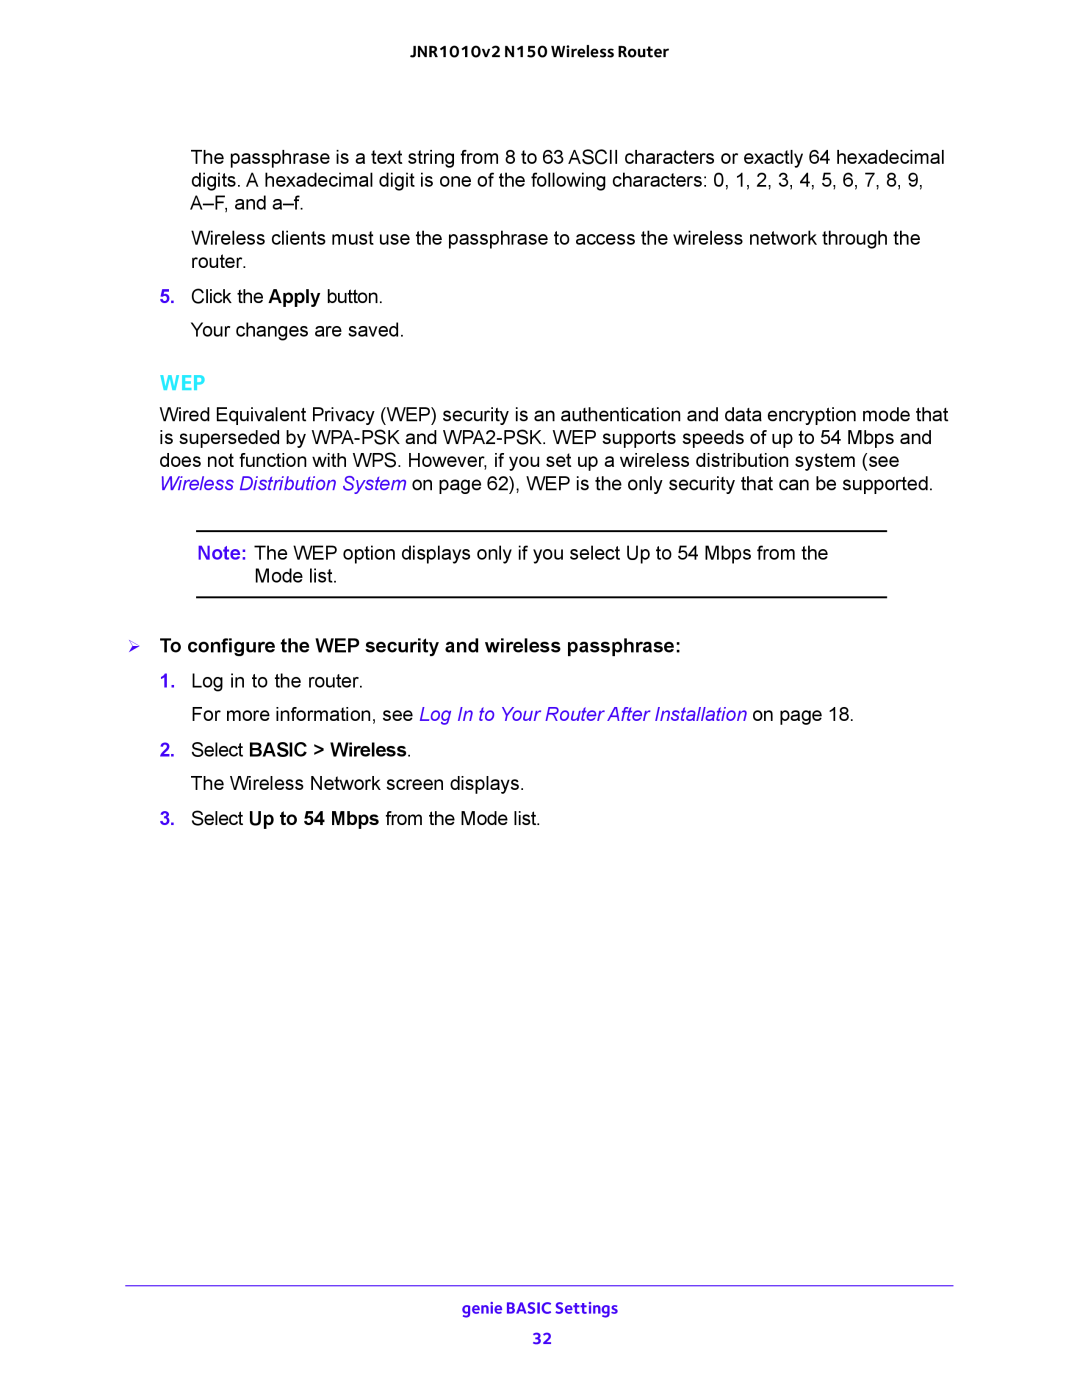 NETGEAR JNR1010V2 user manual  To configure the WEP security and wireless passphrase, Select BASIC Wireless 